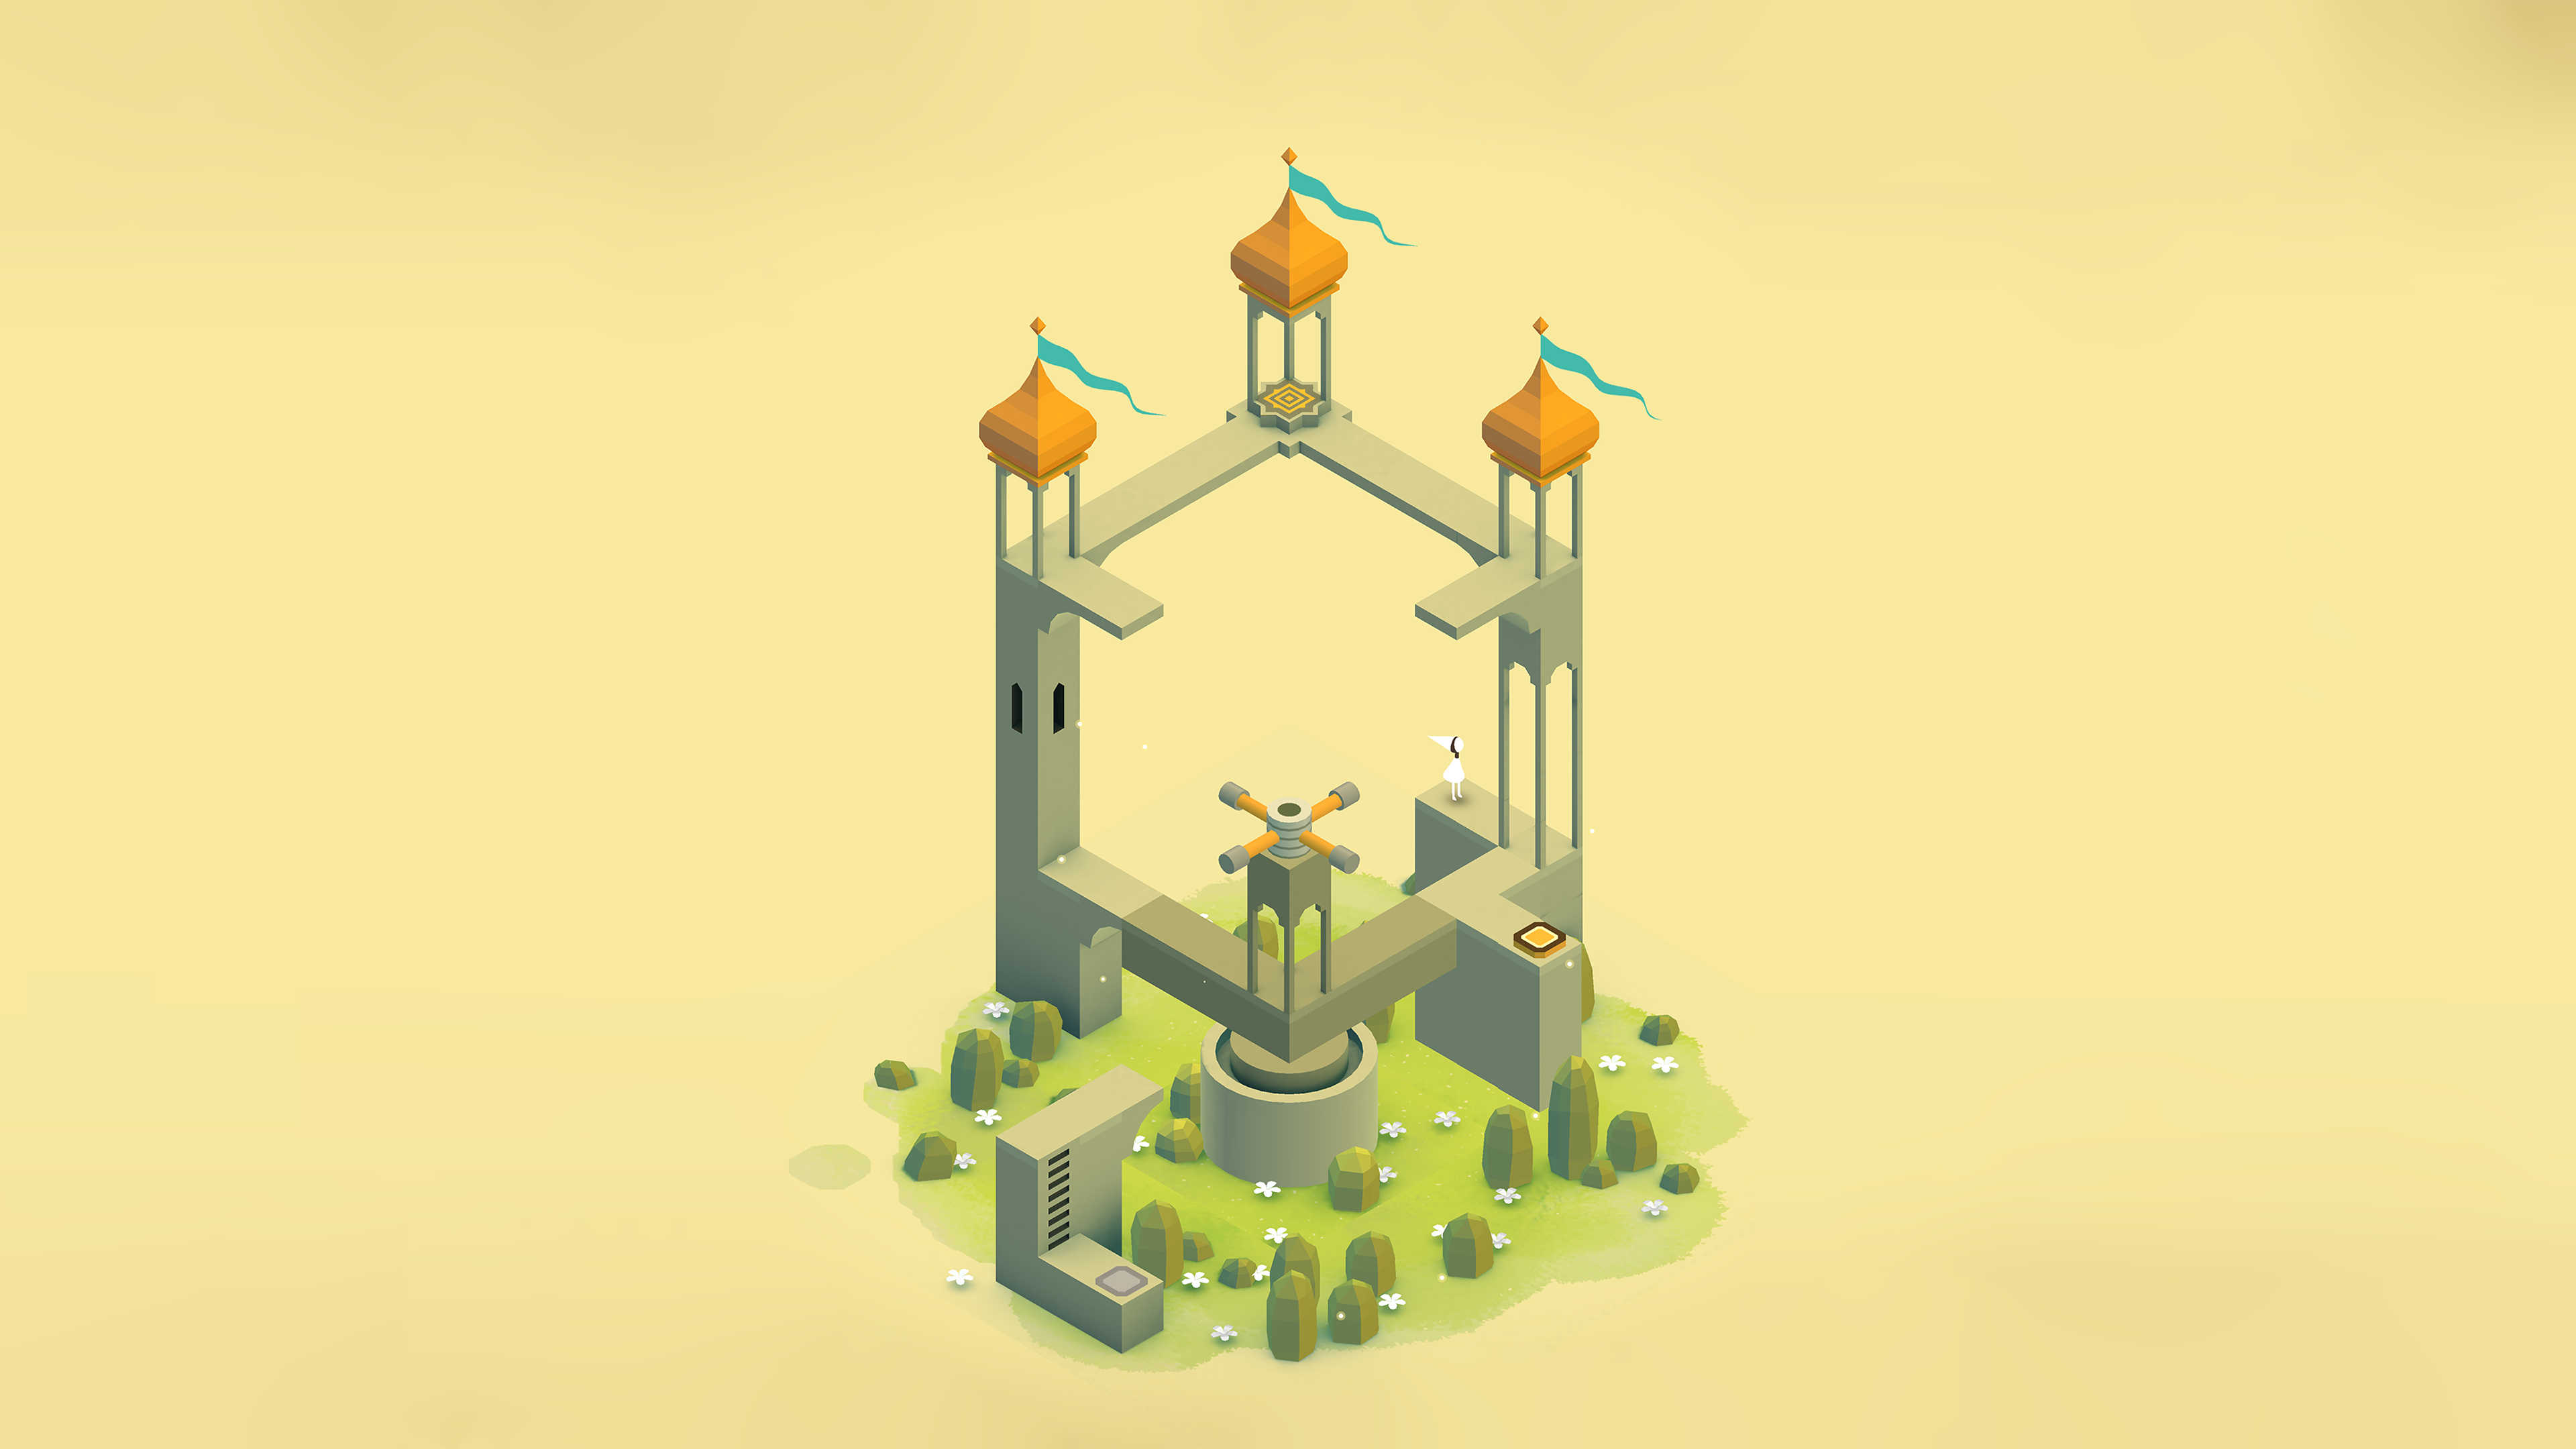 Monument Valley - Garden by ustwo